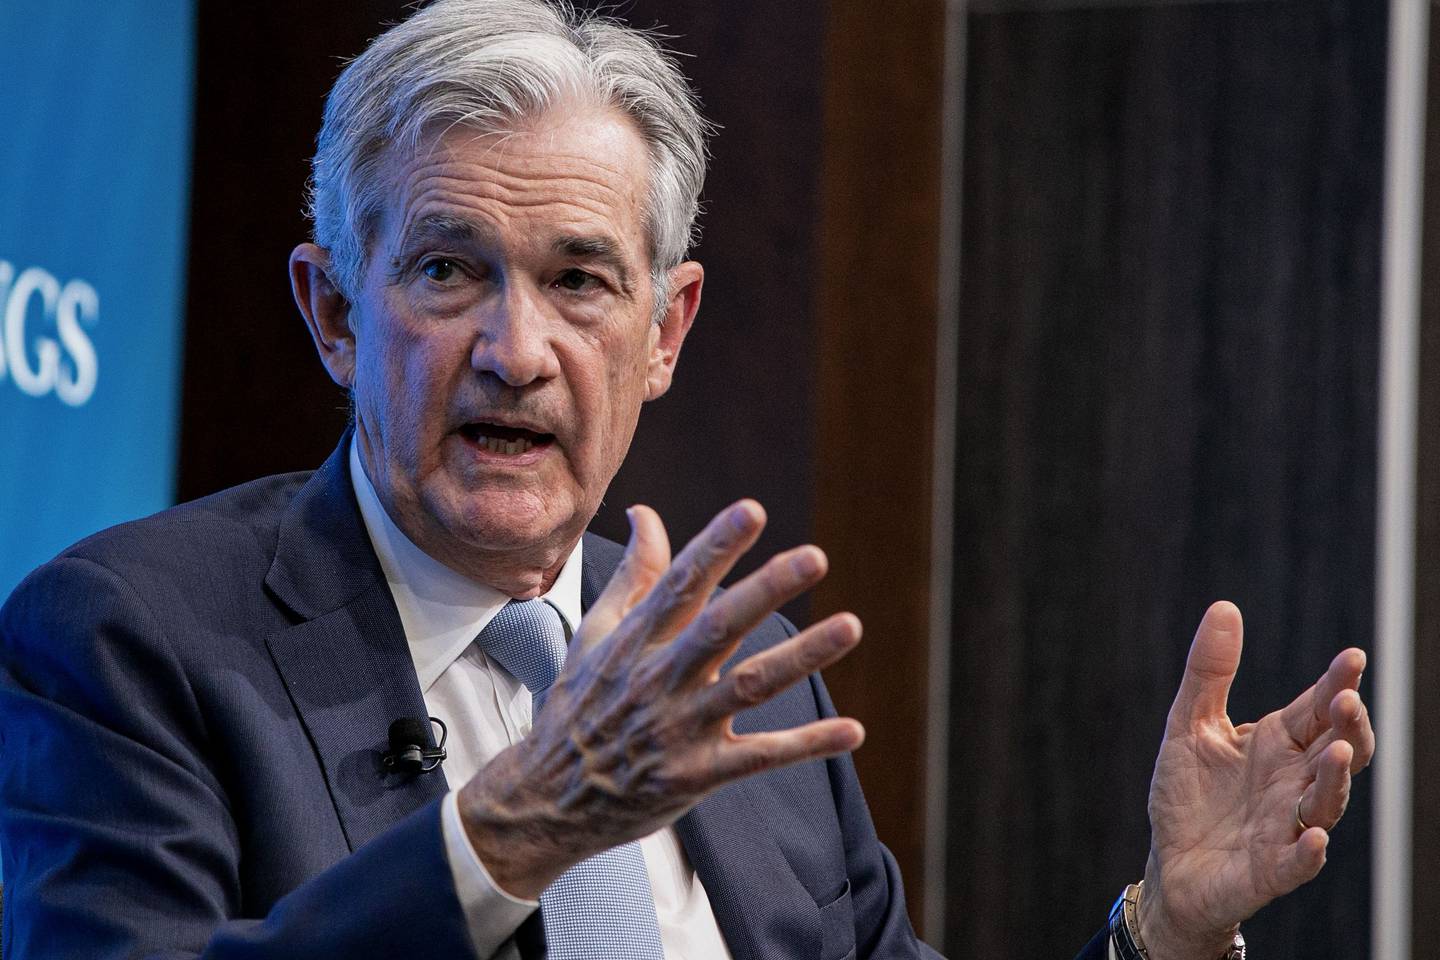 Jerome Powell, chairman of the US Federal Reserve, speaks at the Brookings Institution in Washington, DC, US, on Wednesday, Nov. 30, 2022.